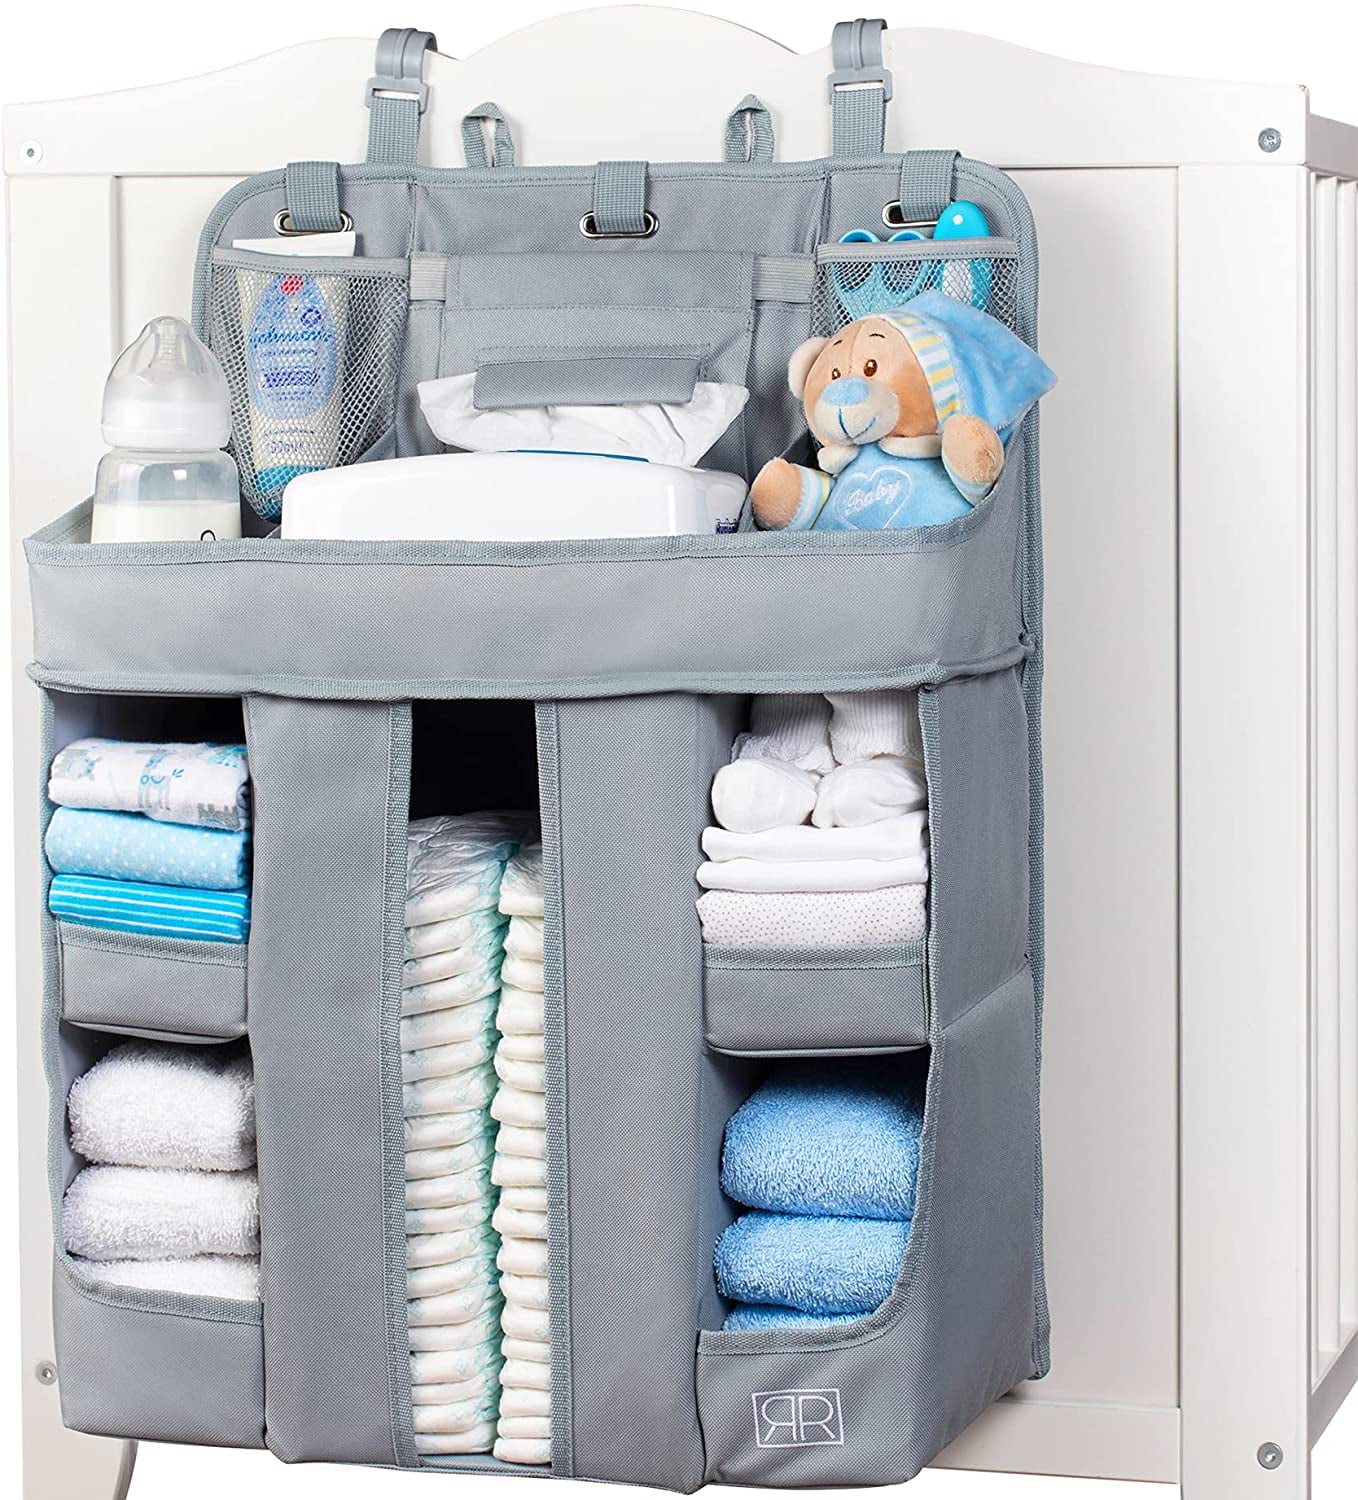 Wall & Bassinet Crib Baby Essentials Storage Hanging Diaper Caddy Organizer,Diaper Stacker and Crib Organizer,Upgrade Thicken Nursery Organizer for Changing Table Gray 